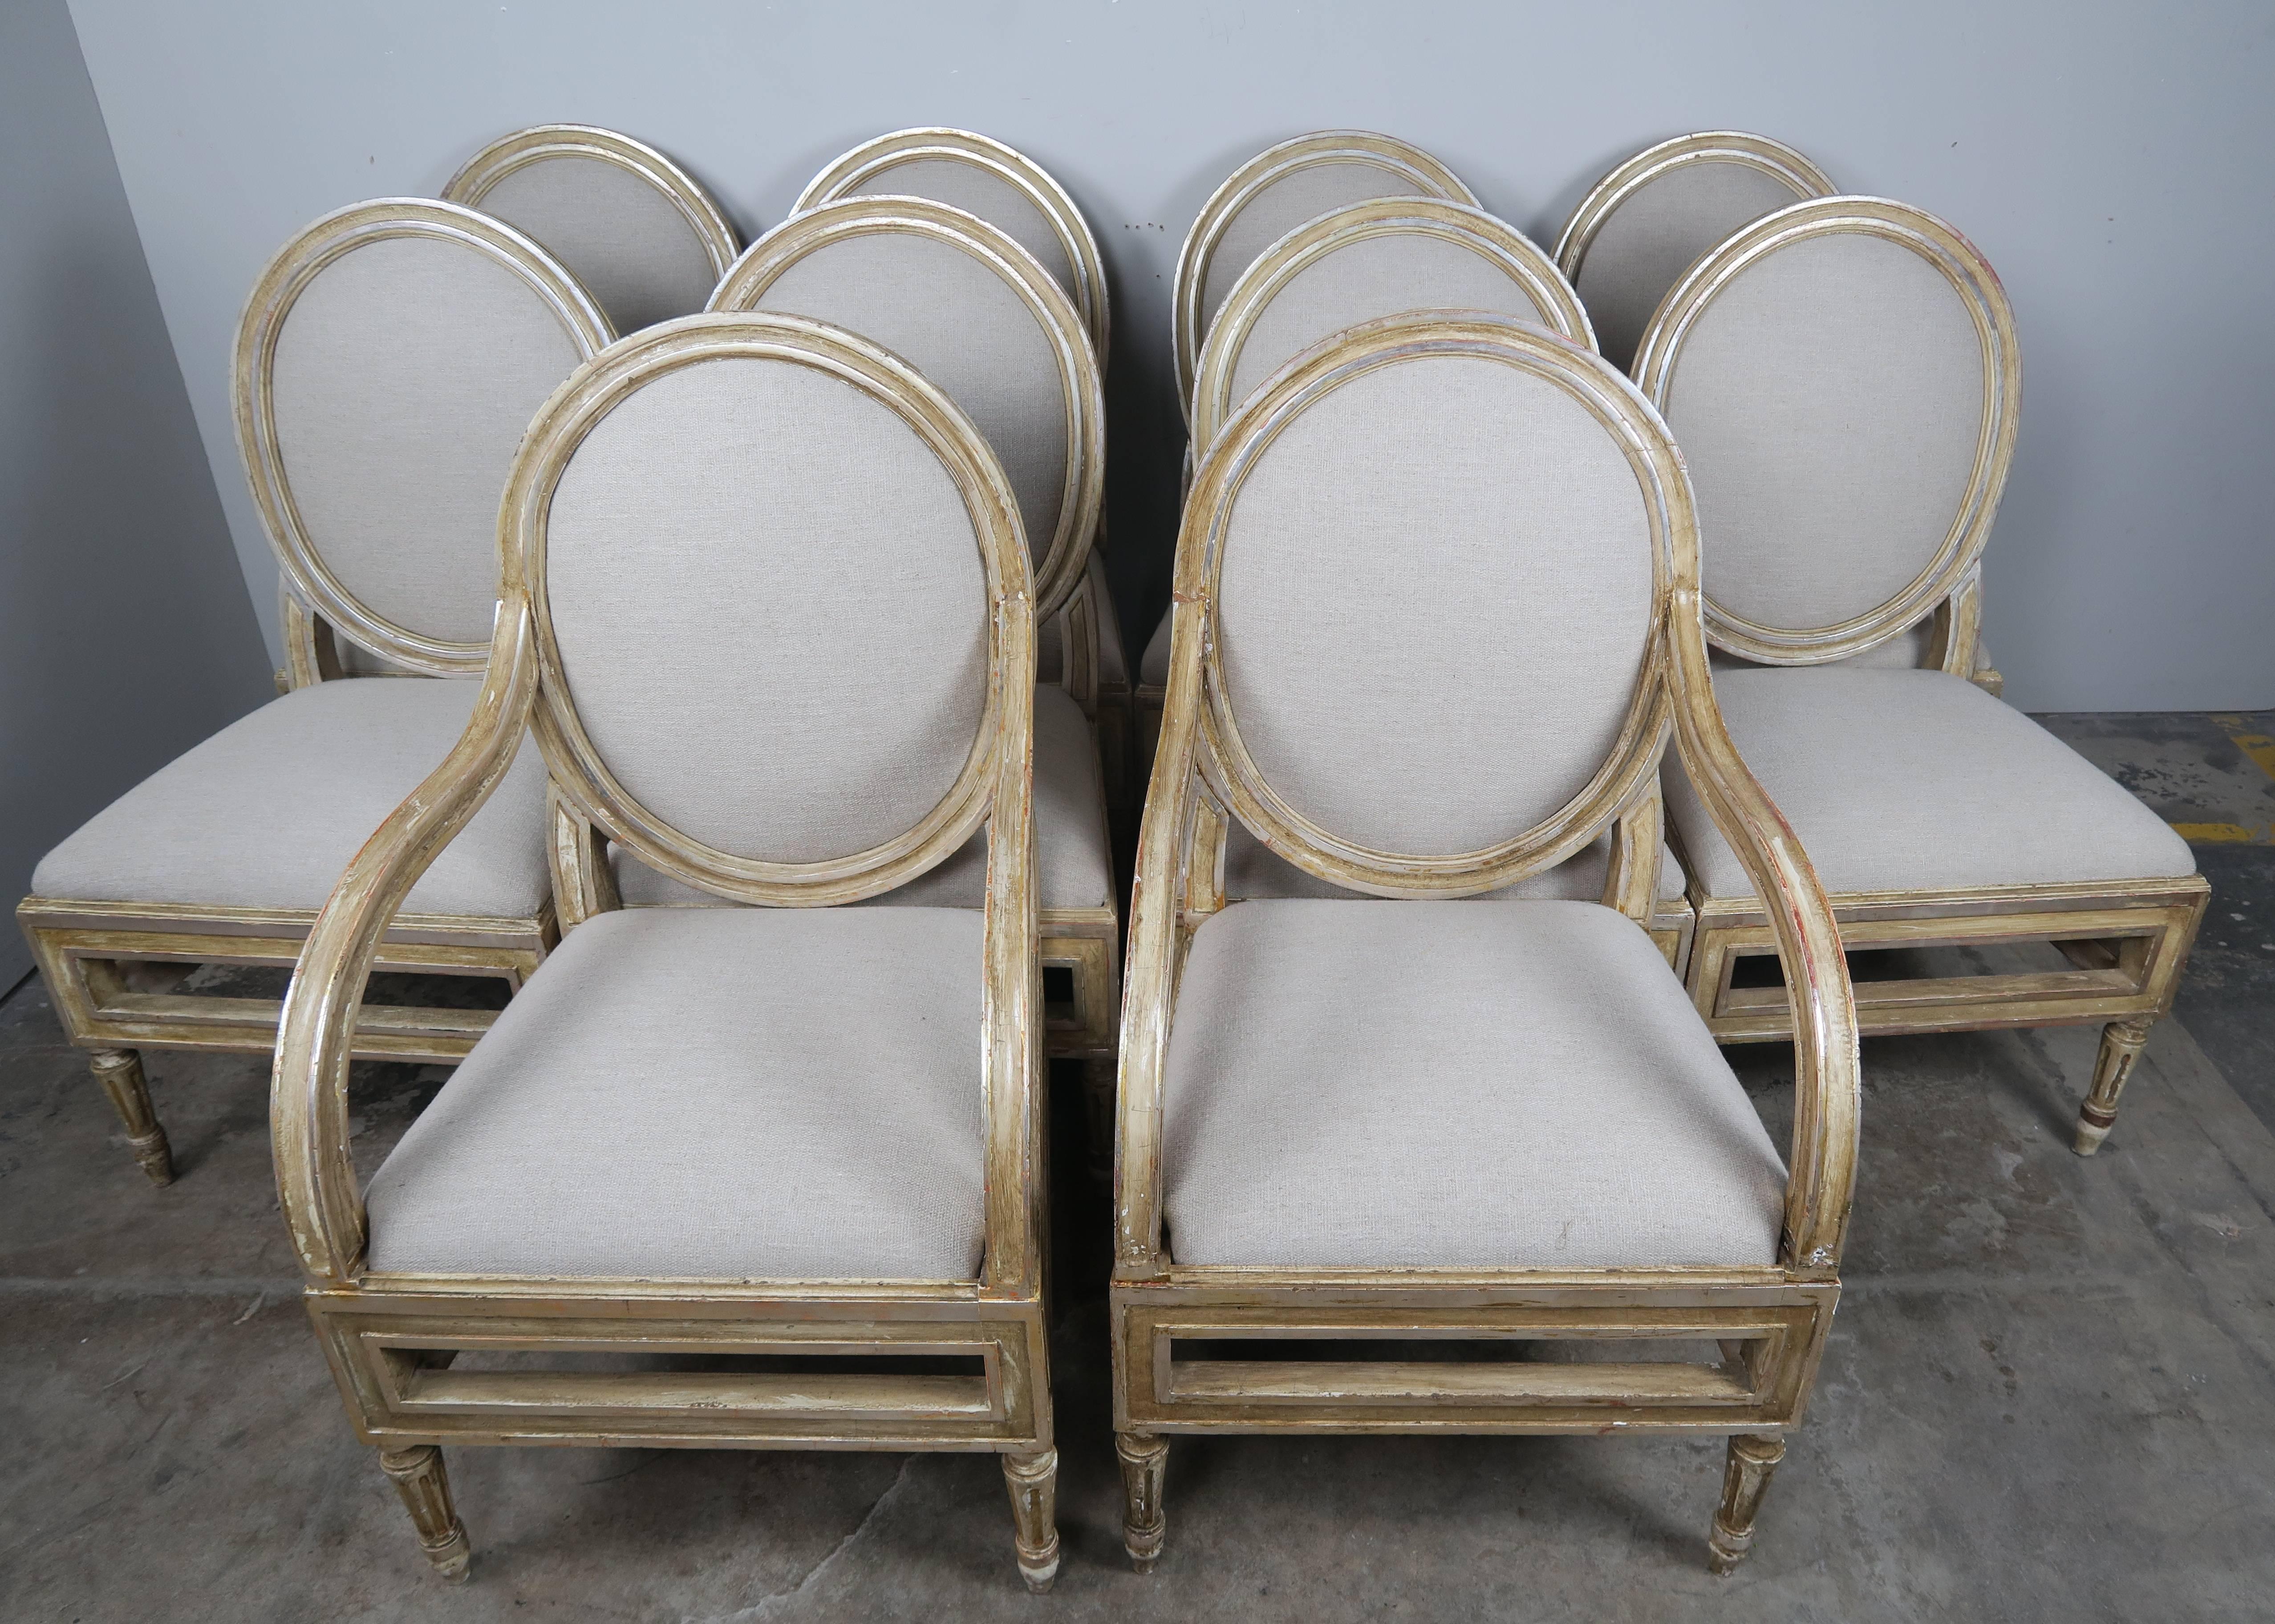 Set of ten Italian Louis XVI style painted and parcel silver gilt dining chairs standing on straight fluted legs with oval backs. The chairs have been newly upholstered in a Belgium linen.